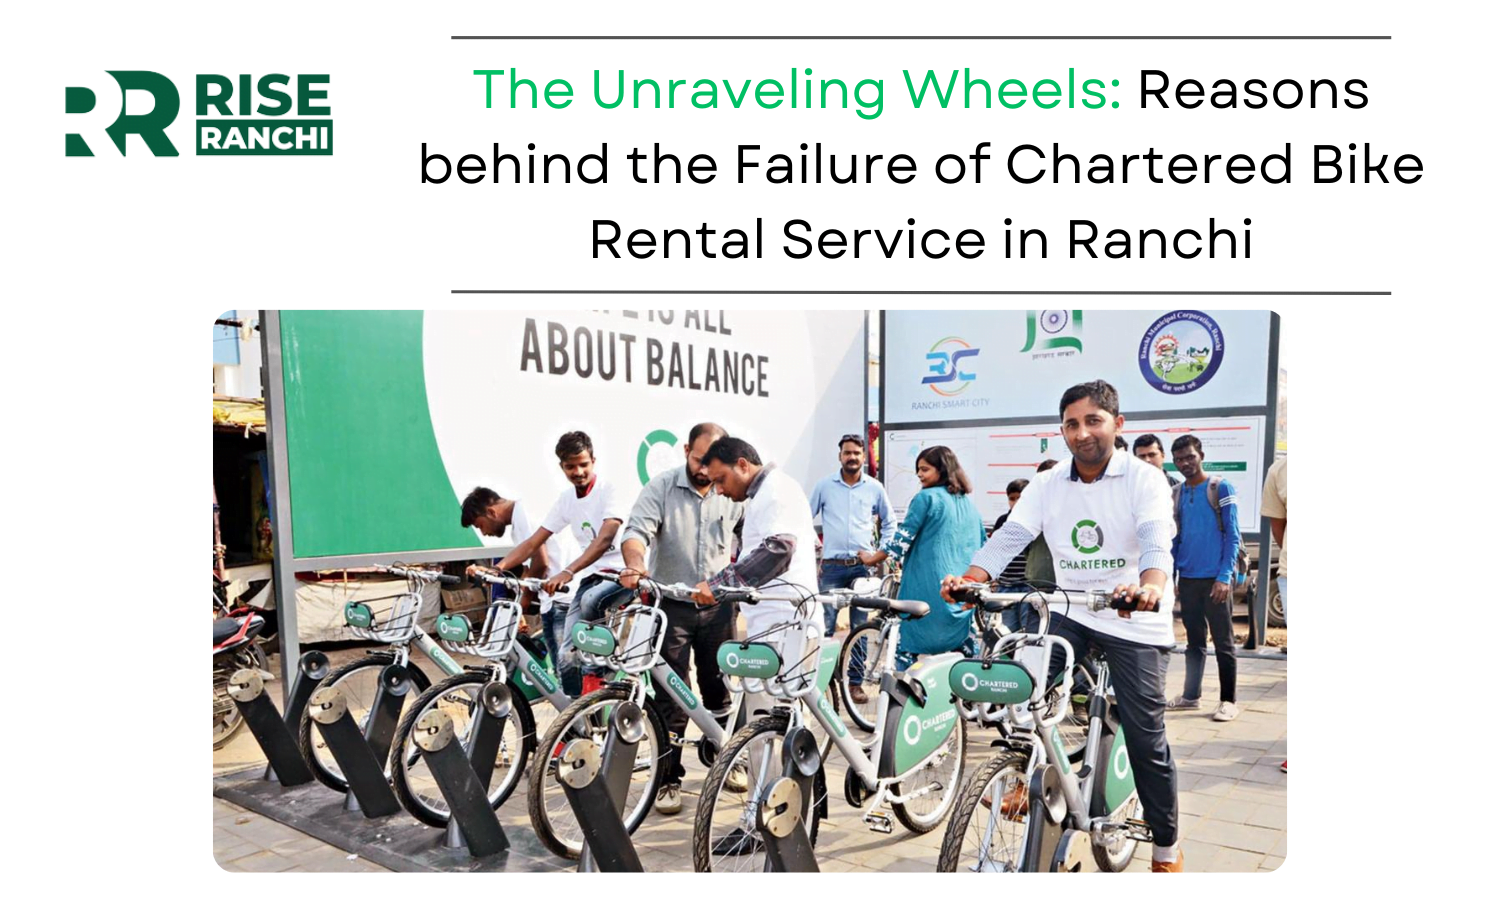 The Unraveling Wheels: Reasons behind the Failure of Chartered Bike Rental Service in Ranchi